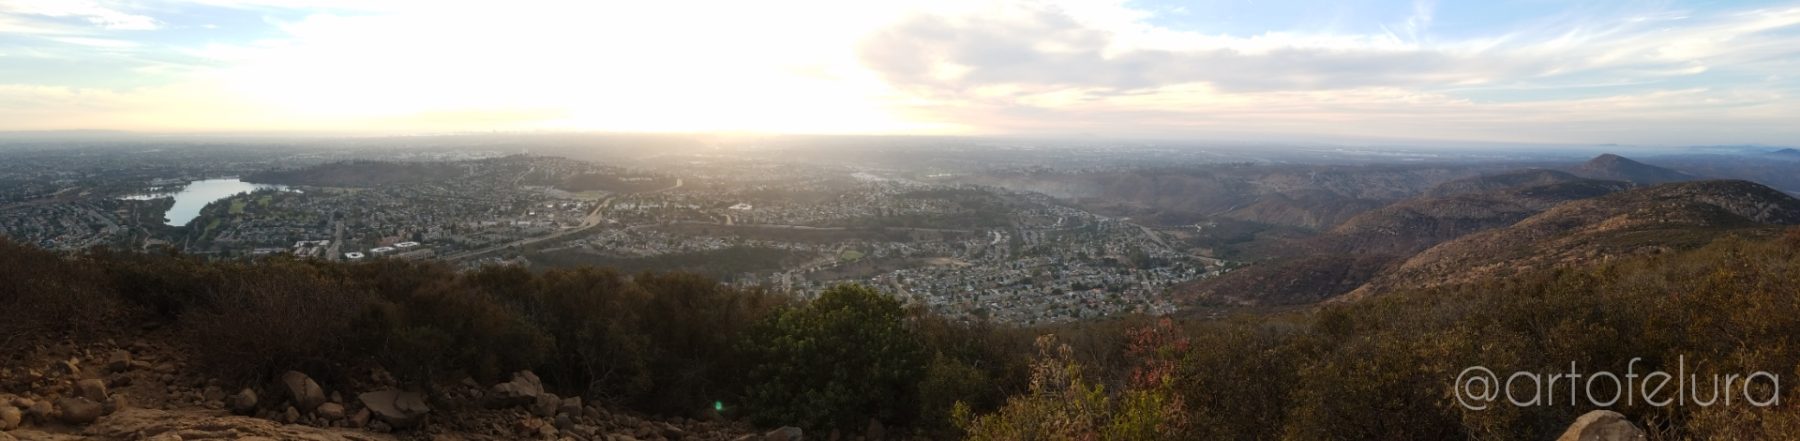 PANORAMA OF SAN DIEGO FROM THE VIEW OF COWELS MOUNTAIN SAN DIEGO